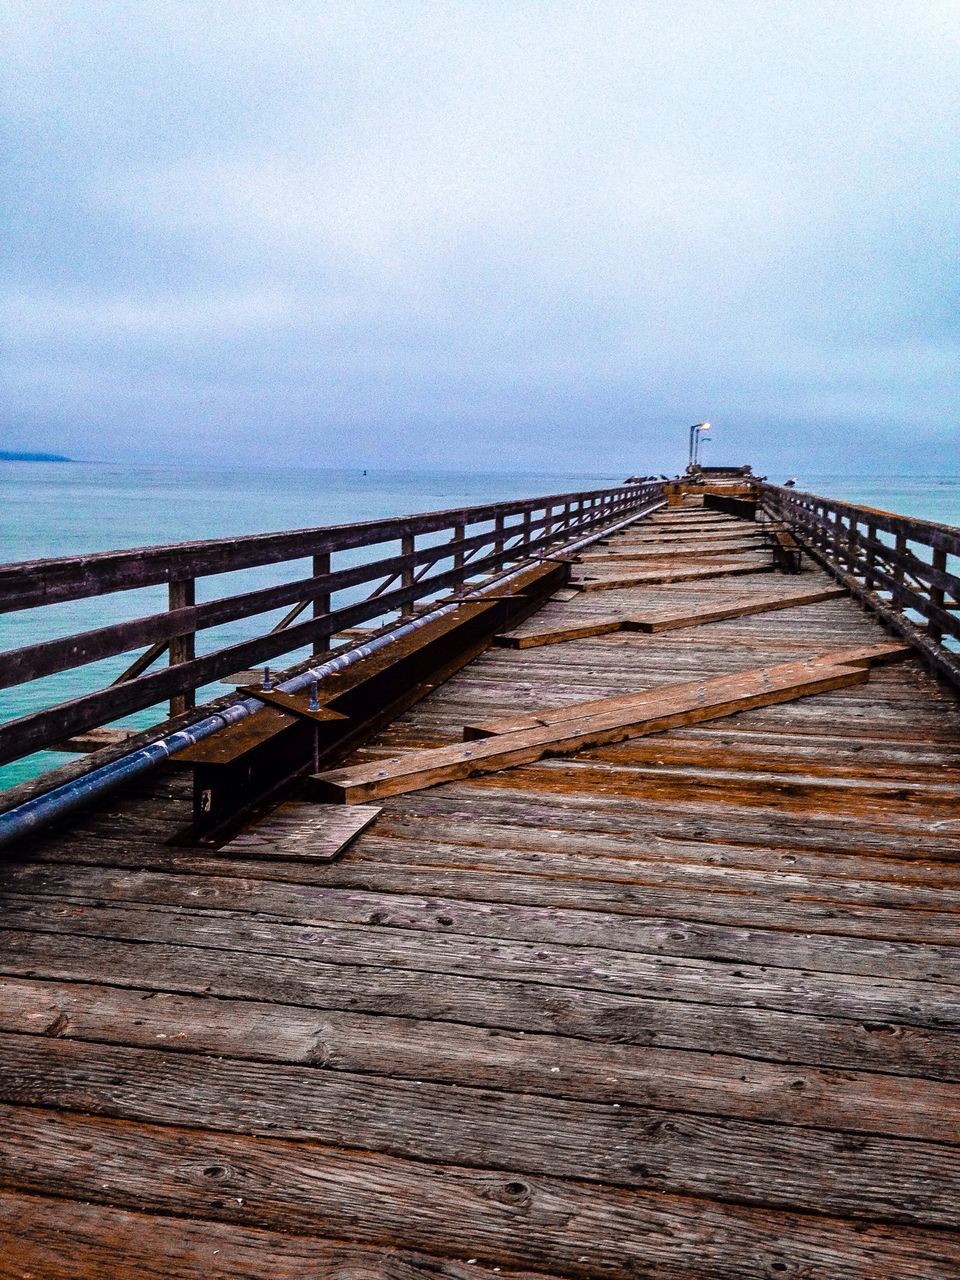 pier, water, sea, railing, wood - material, sky, tranquility, boardwalk, tranquil scene, jetty, scenics, nature, the way forward, built structure, horizon over water, beauty in nature, footbridge, wood, wooden, idyllic